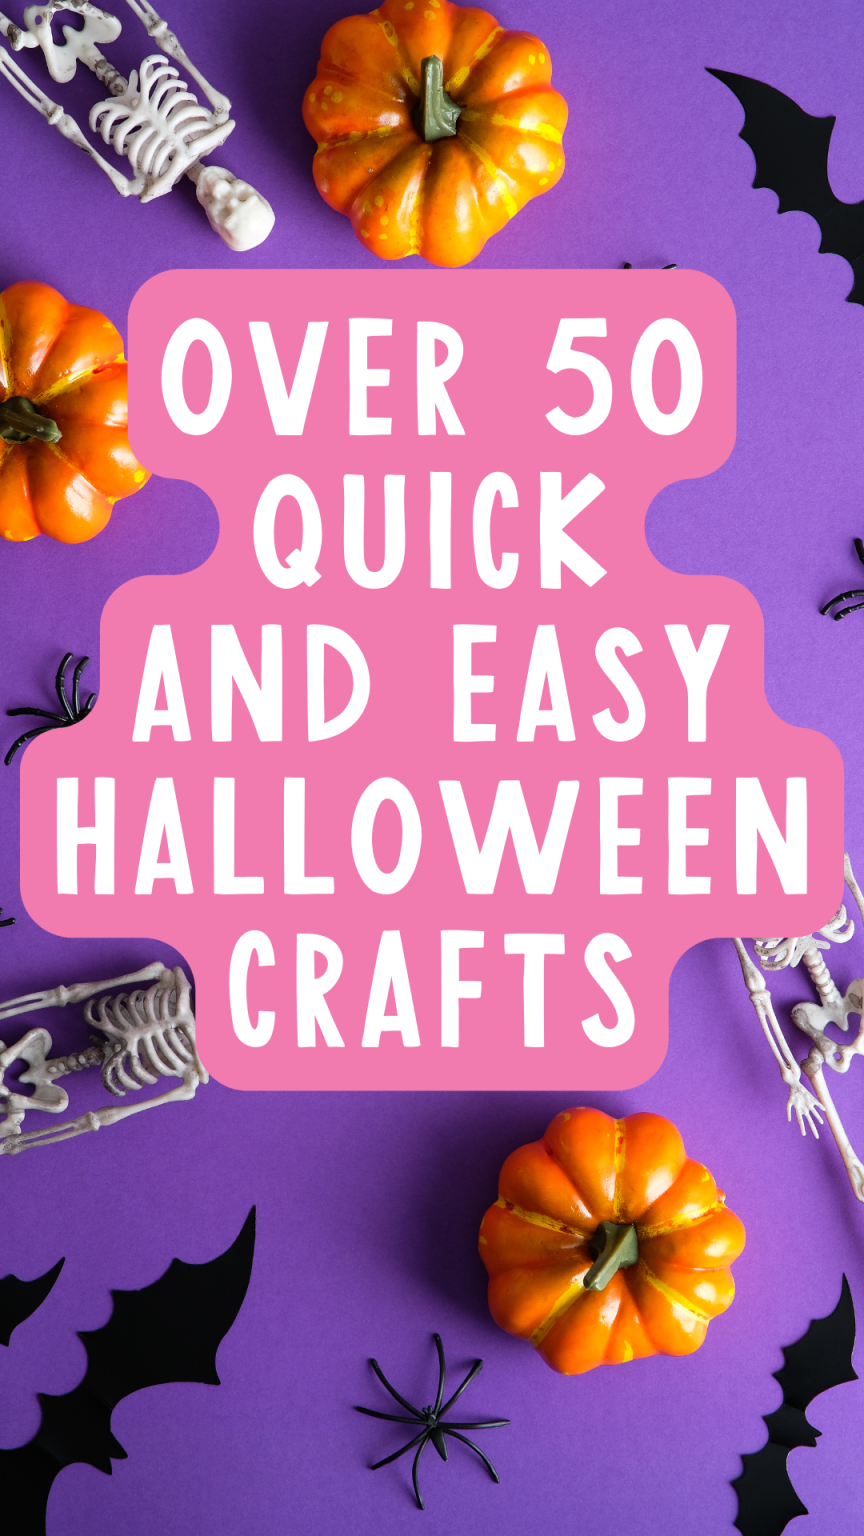 Easy Halloween Crafts - over 50 ideas under 15 minutes! - Angie Holden ...